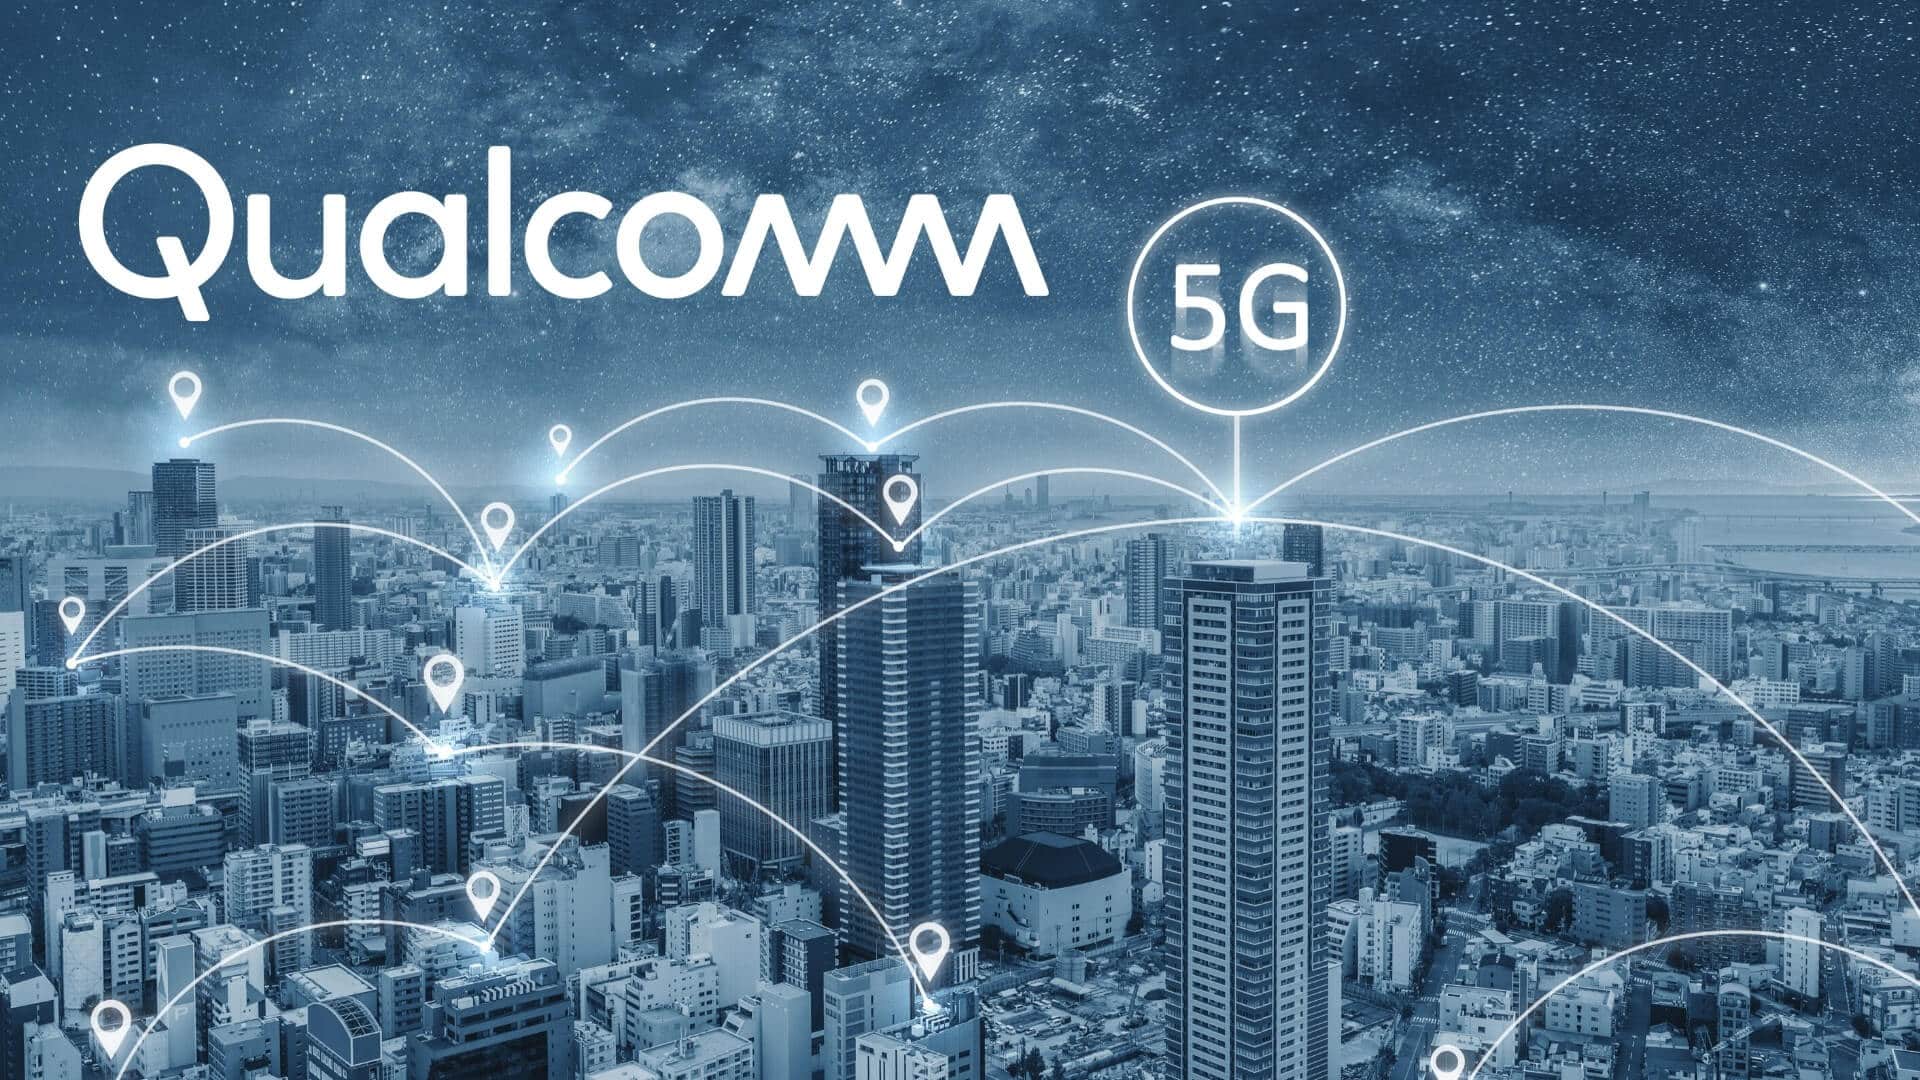 5G is the Future of Mobile Smartphone Technology: Qualcomm